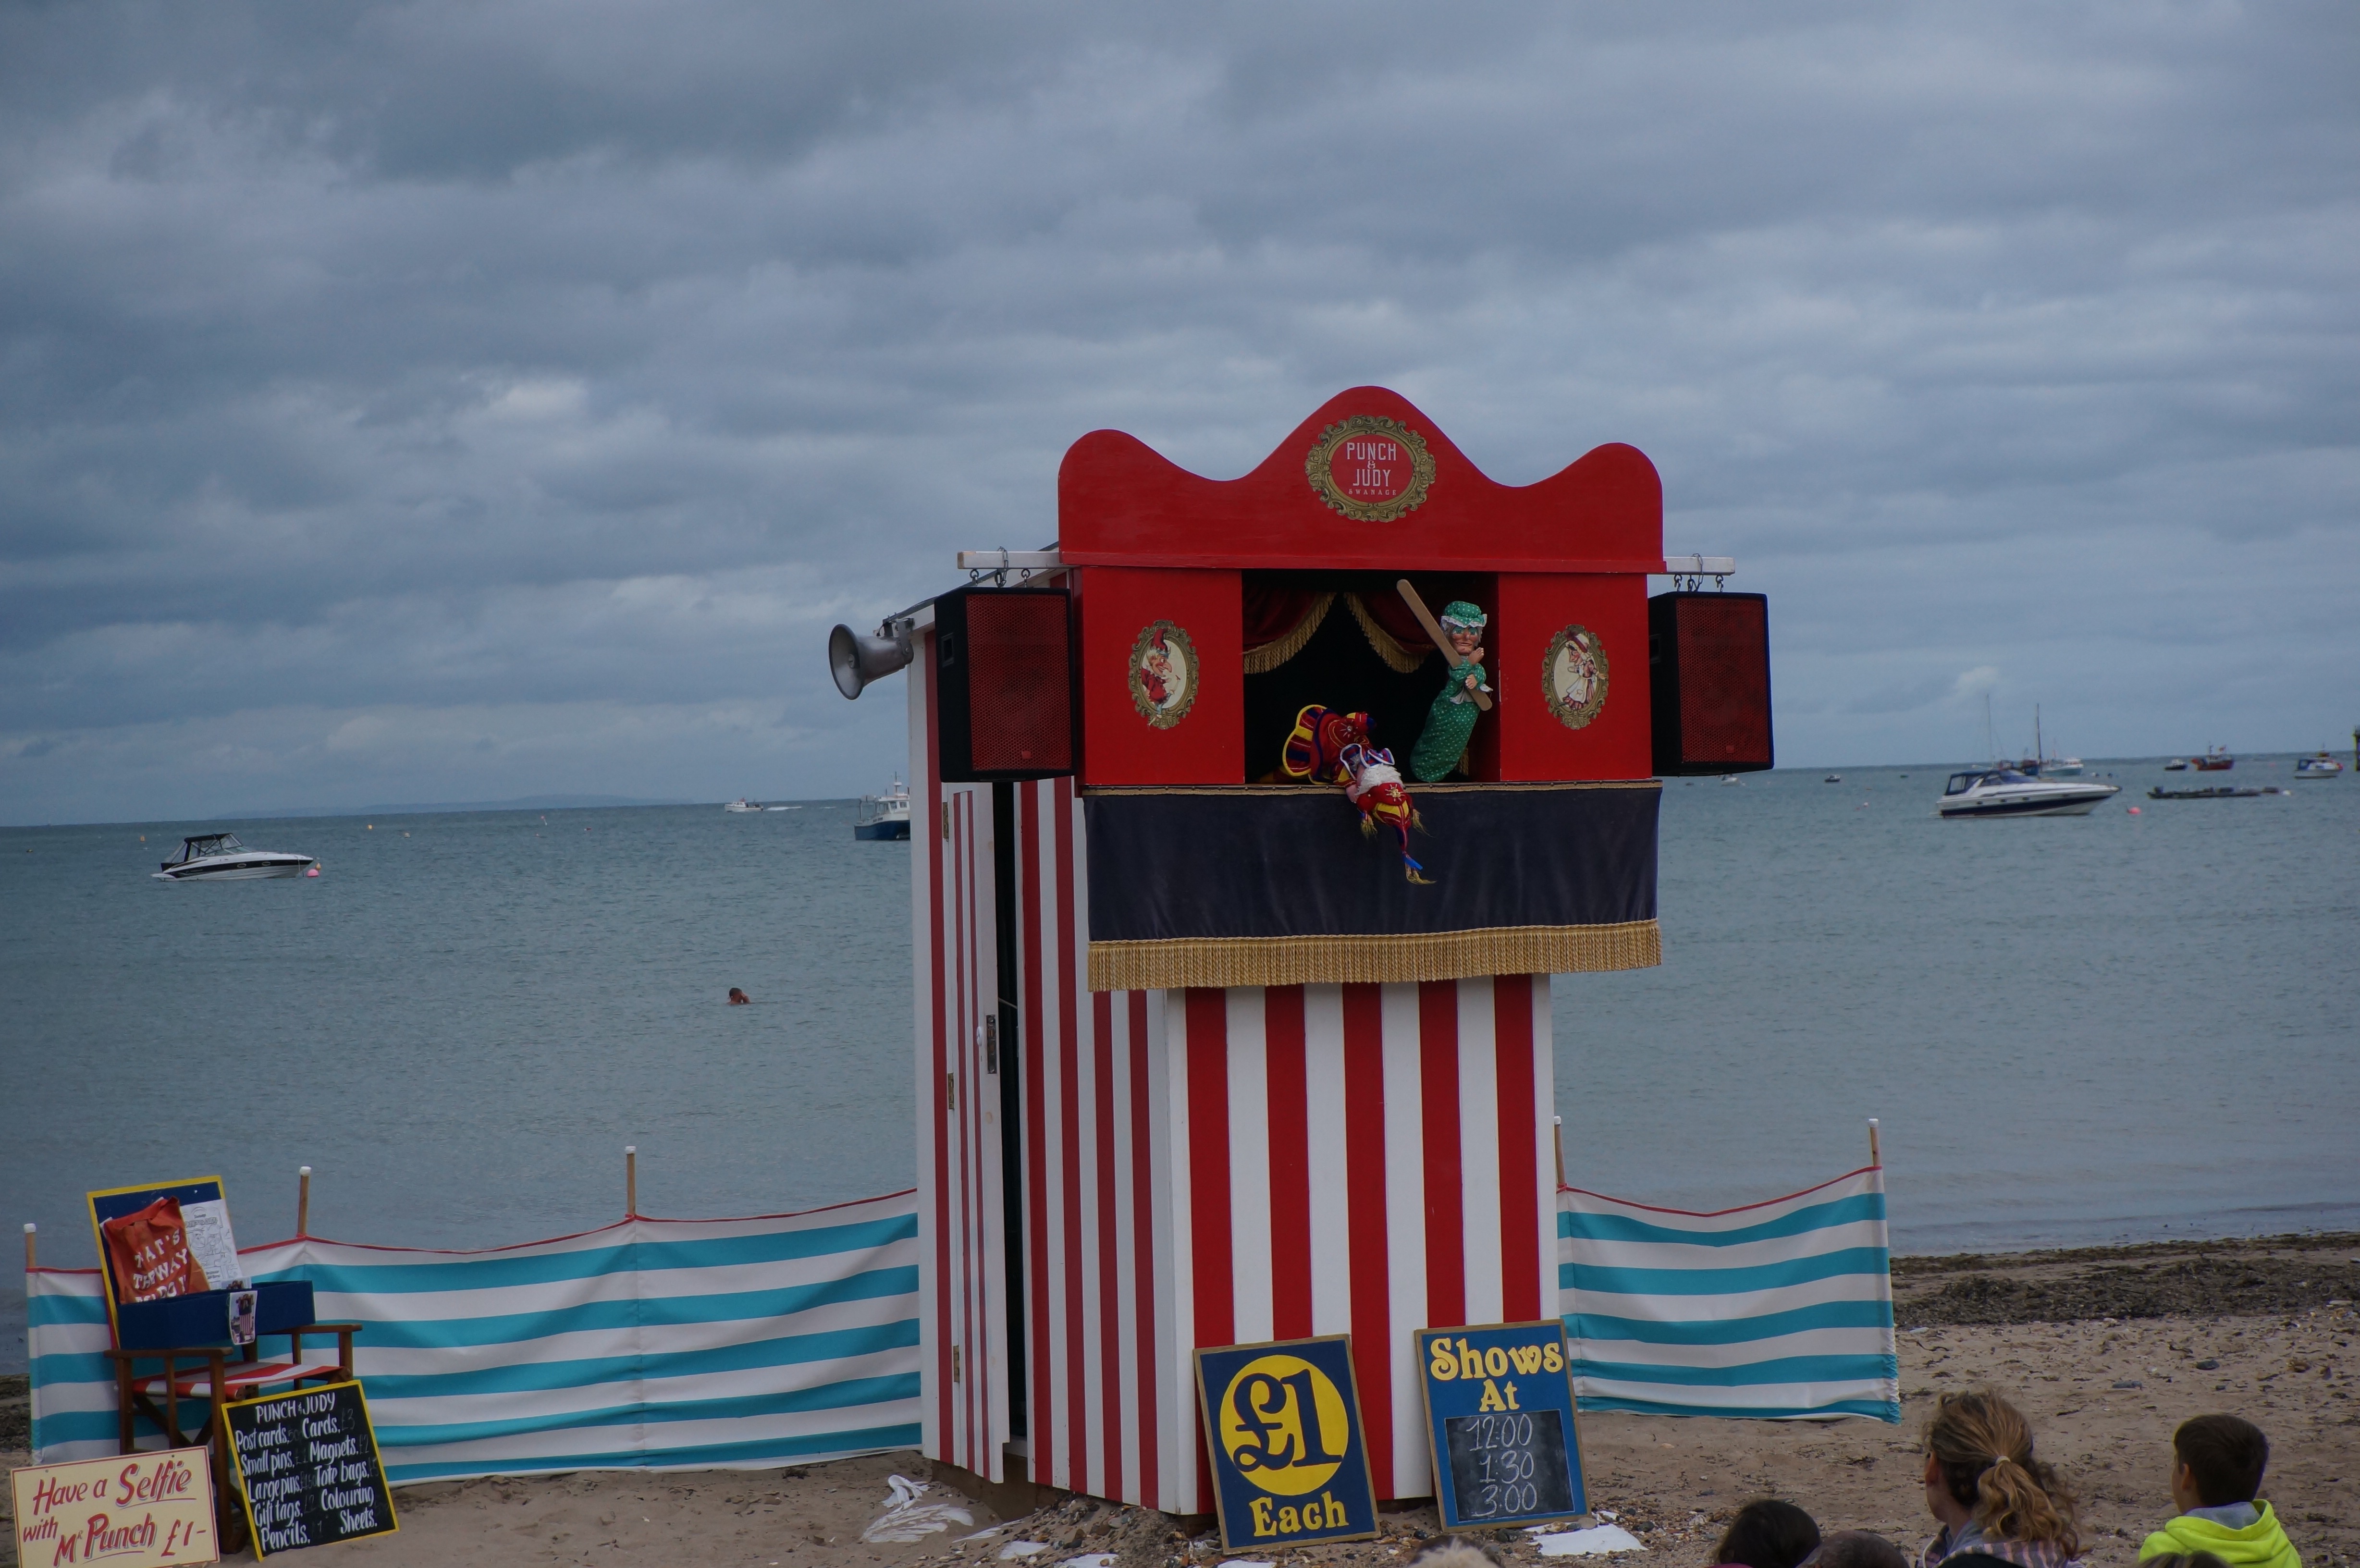 Even Punch and Judy are back!